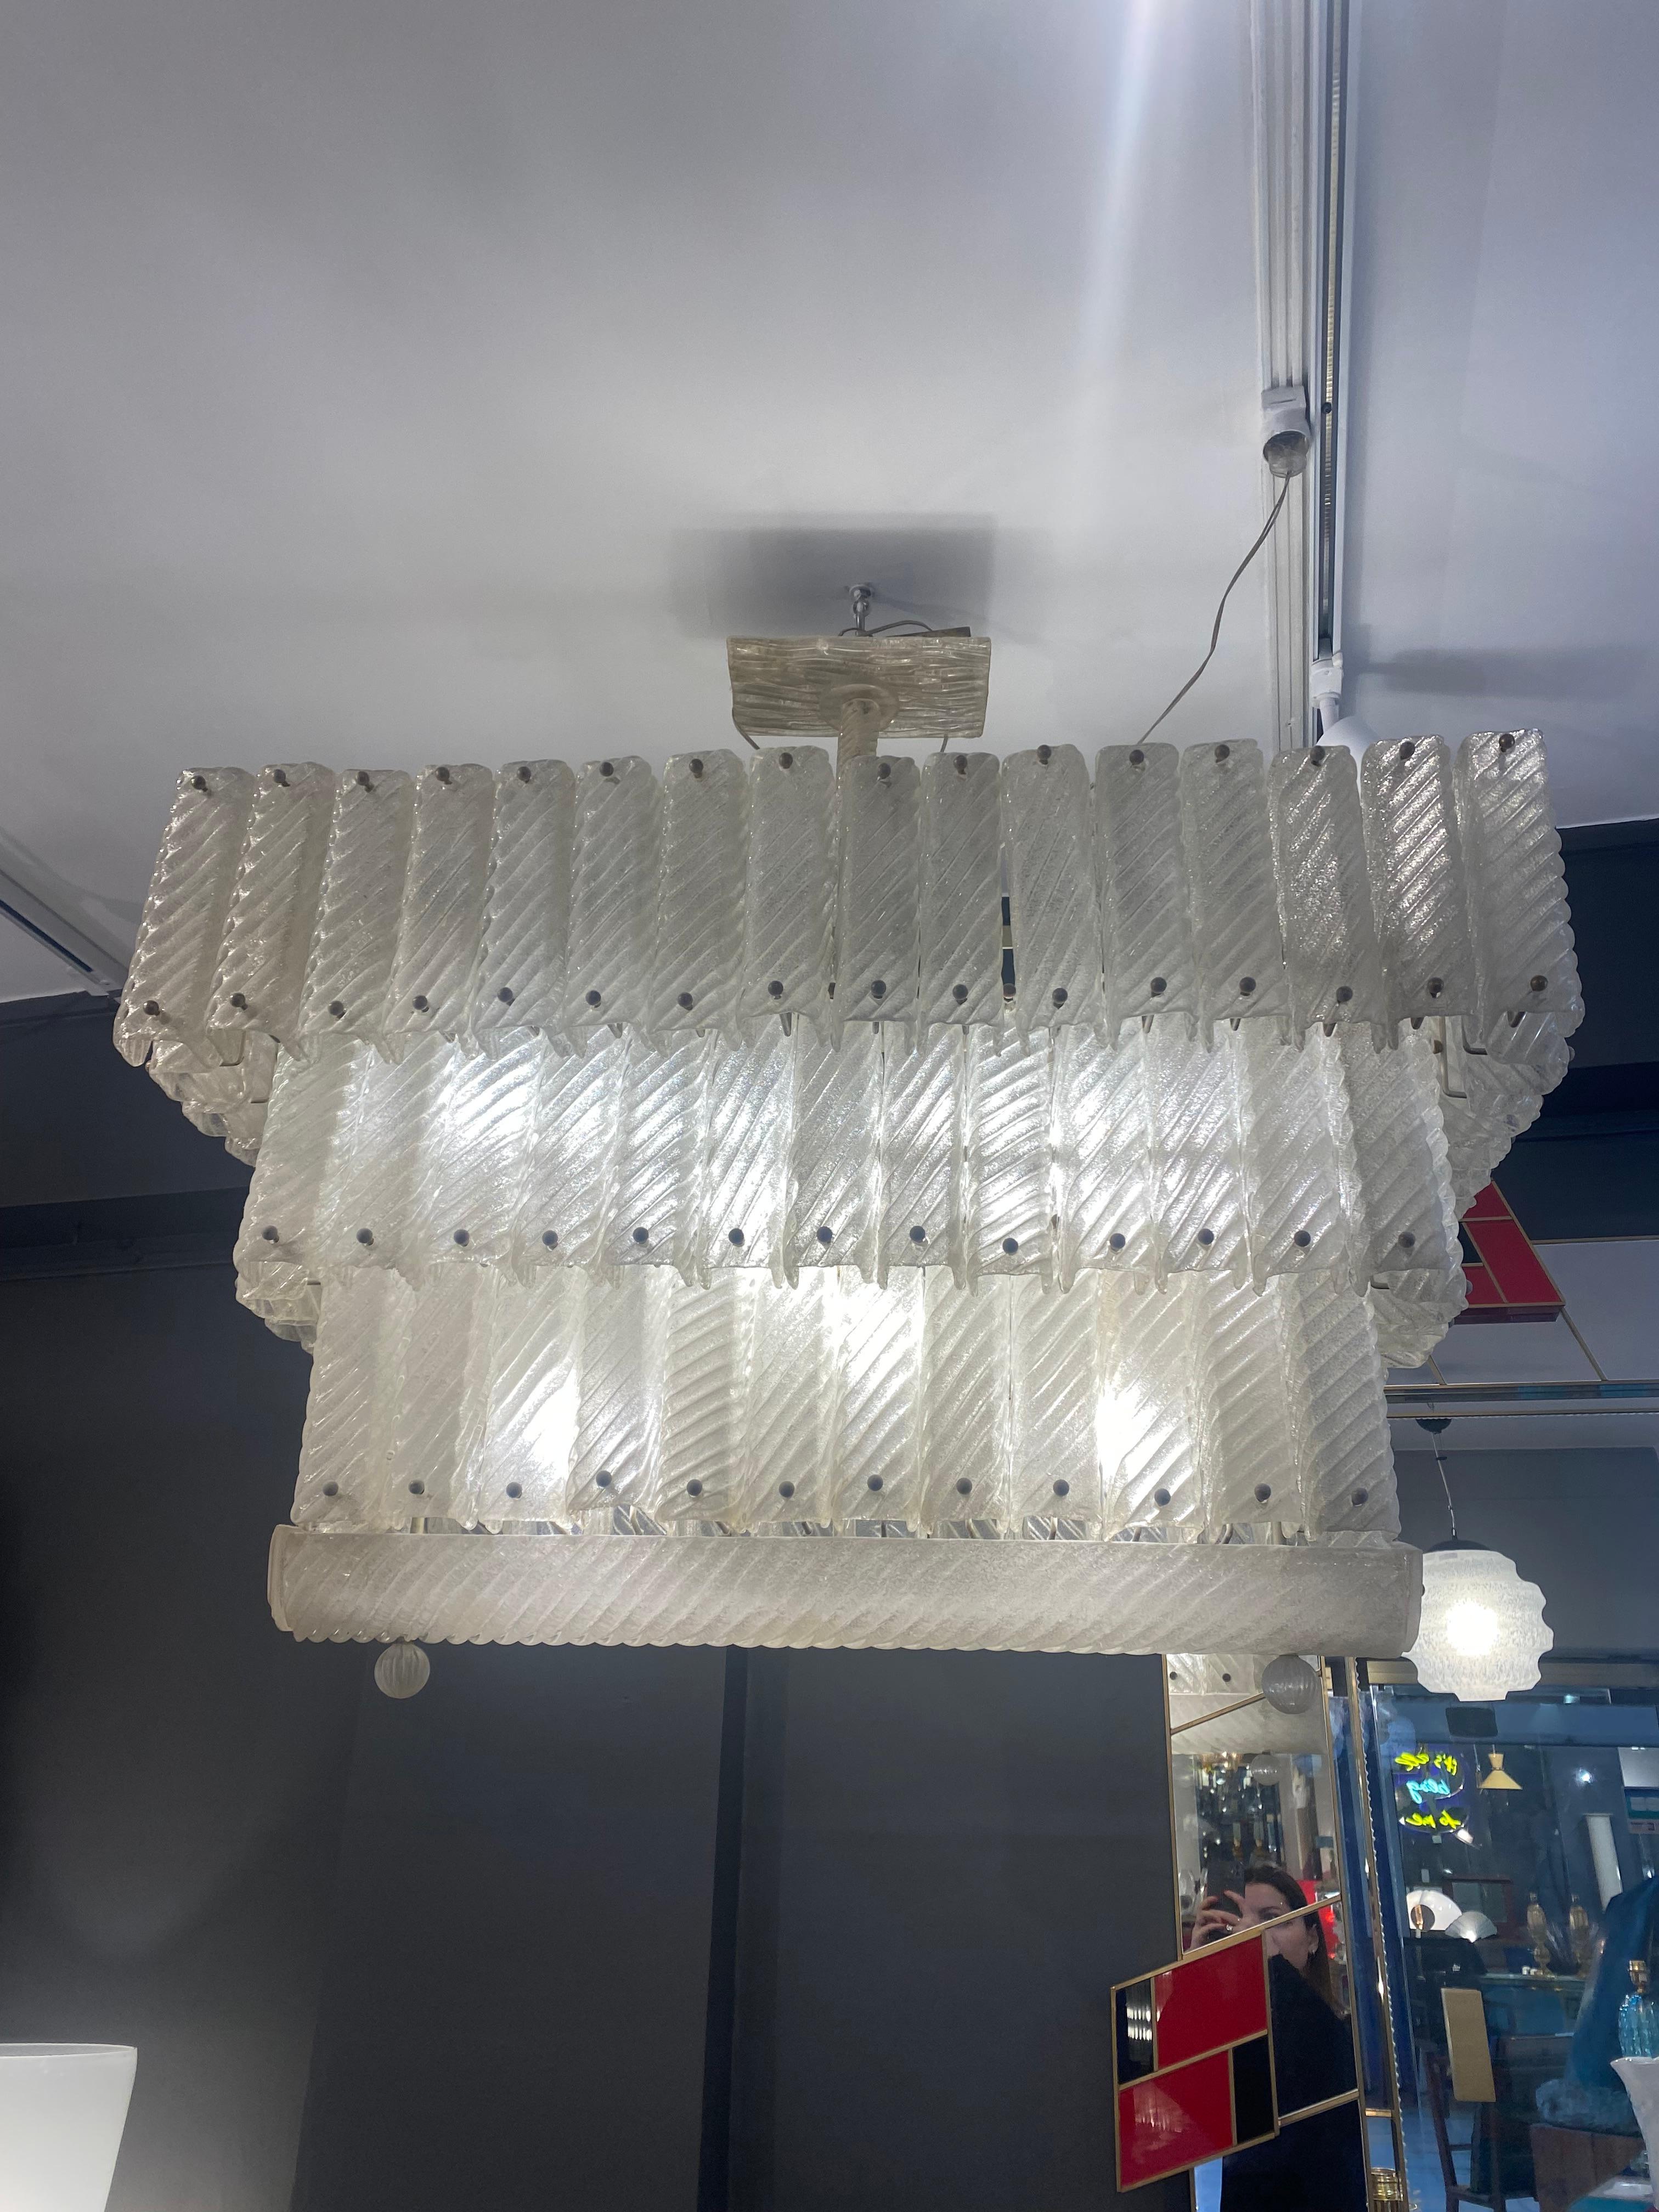 Murano glass chandelier - Circa 1950.
Three levels in chandelier / striated glass plates.
Dimensions: 110 x 105 x 50cm.
In excellent condition.